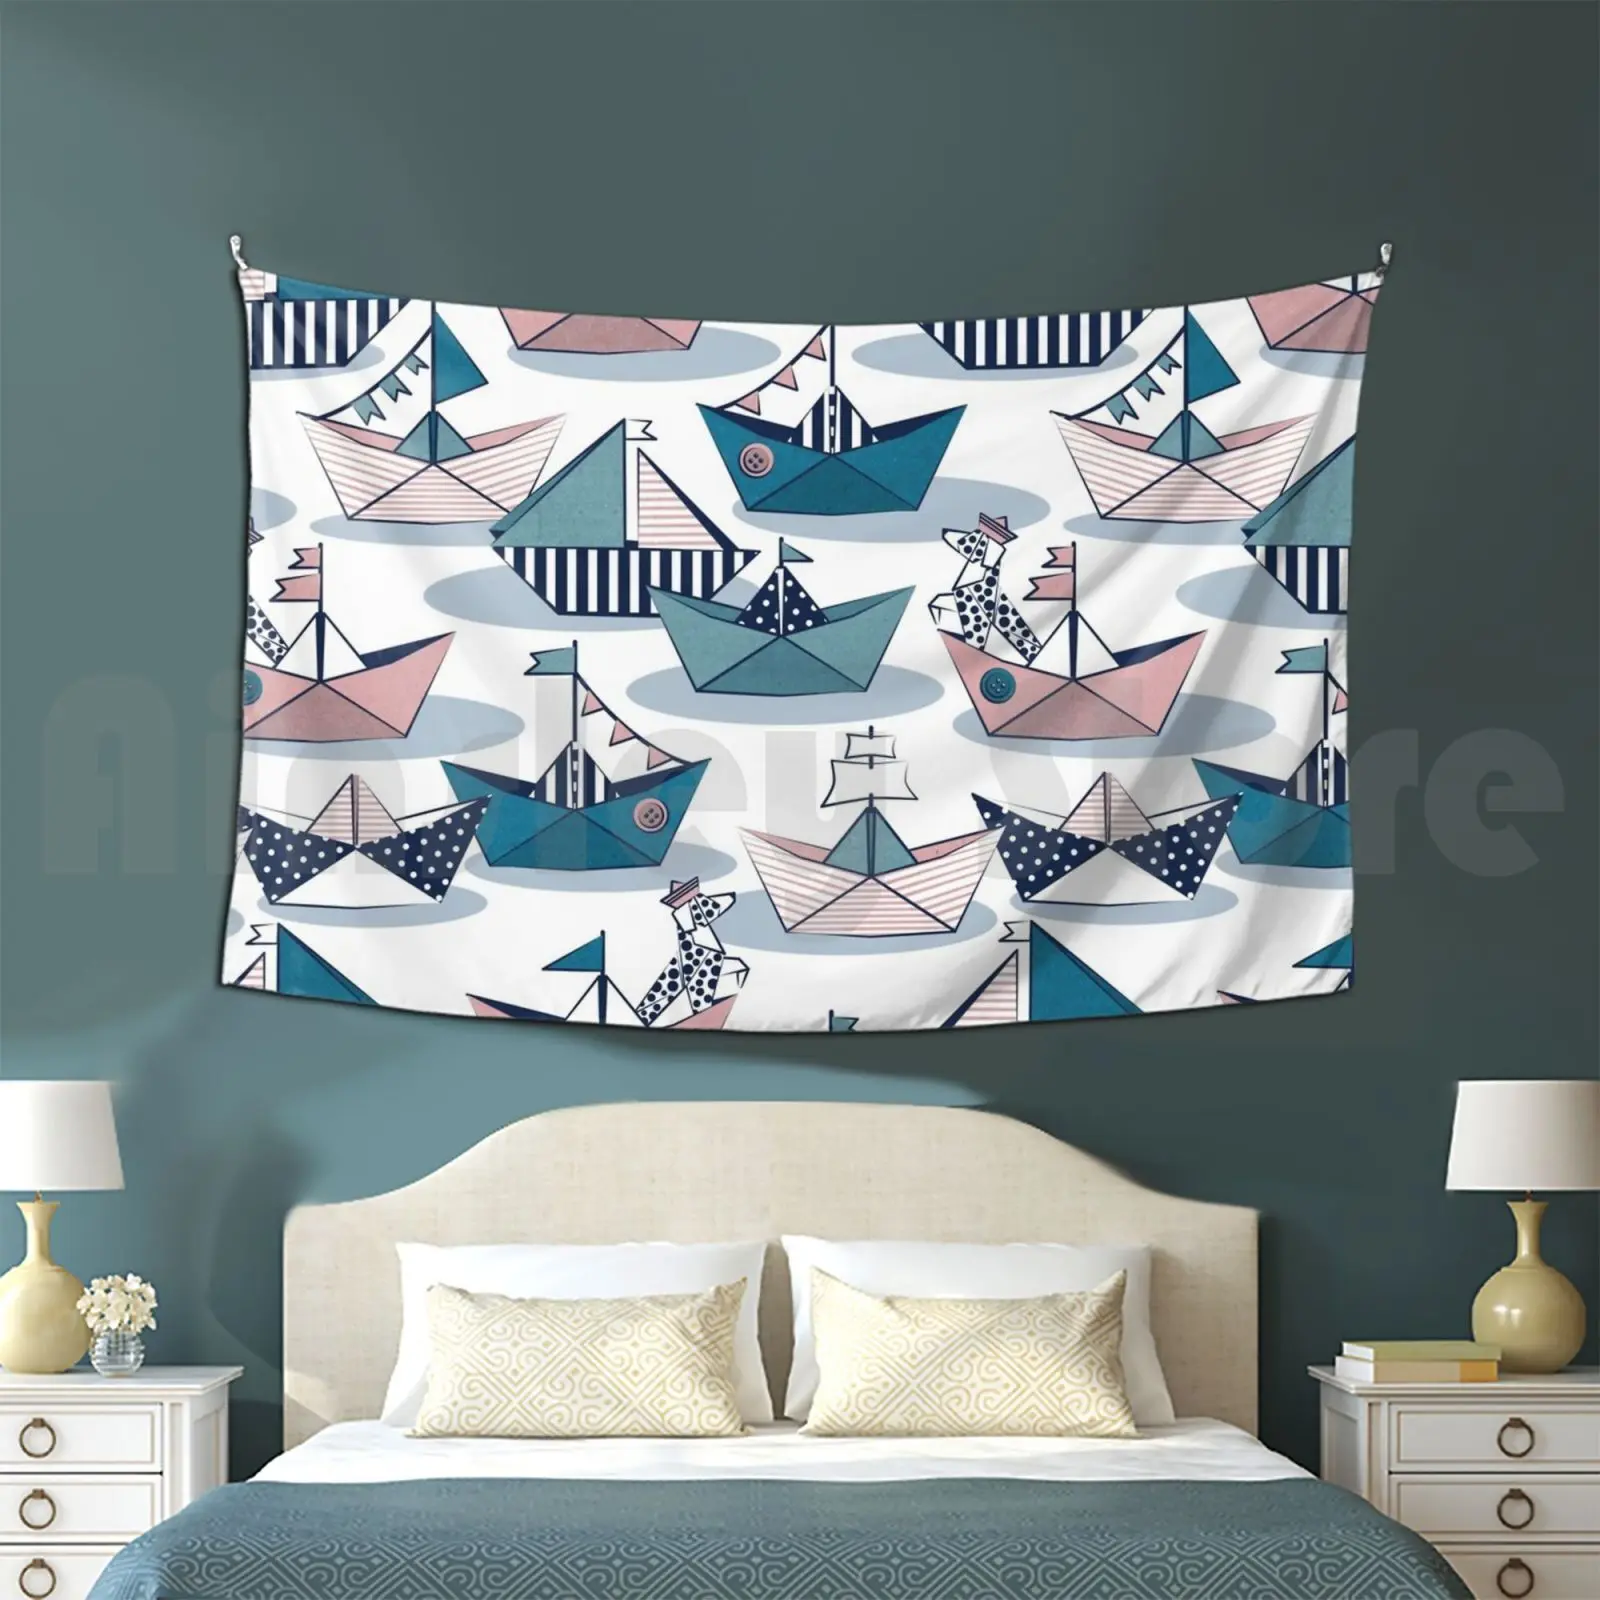 

Tapestry Origami Dog Day At The Lake / / White Background Pink Teal And Blue Origami Sail Boats With Cute Dalmatian